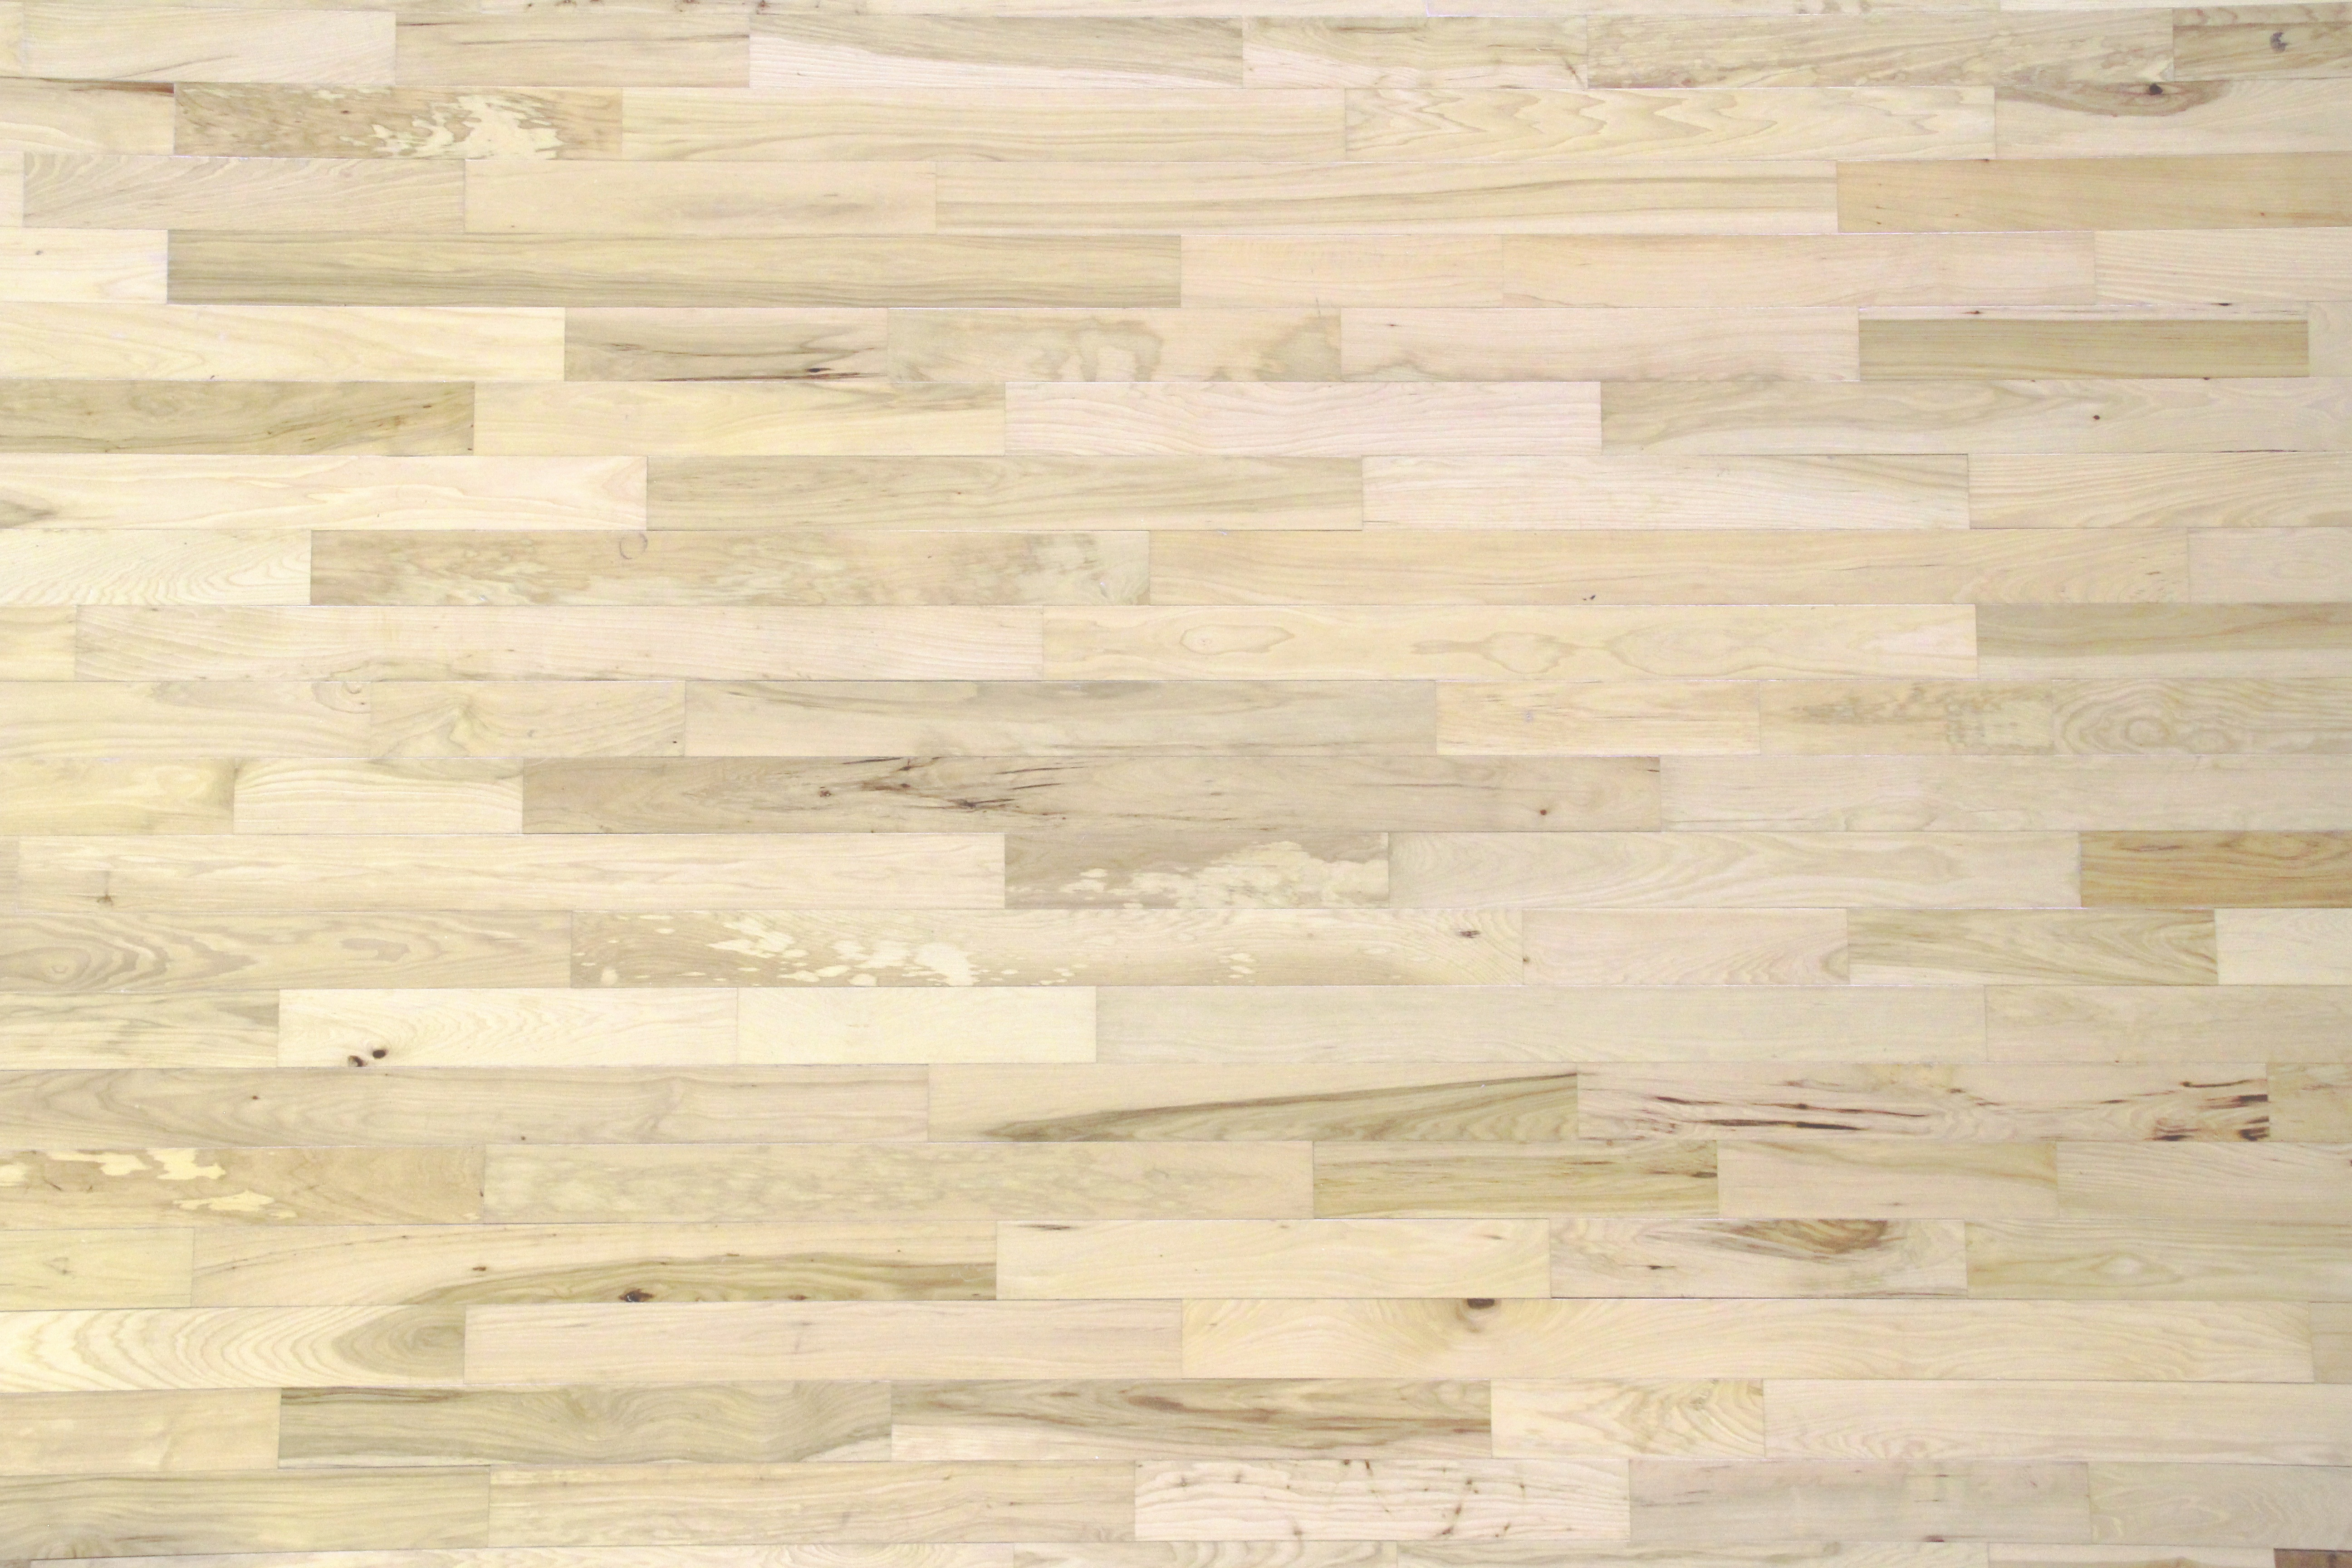 hardwood floor colors images of free images texture wall pine construction tile lumber throughout wood texture floor wall pine construction tile lumber surface wood floor basketball court hardwood wooden flooring